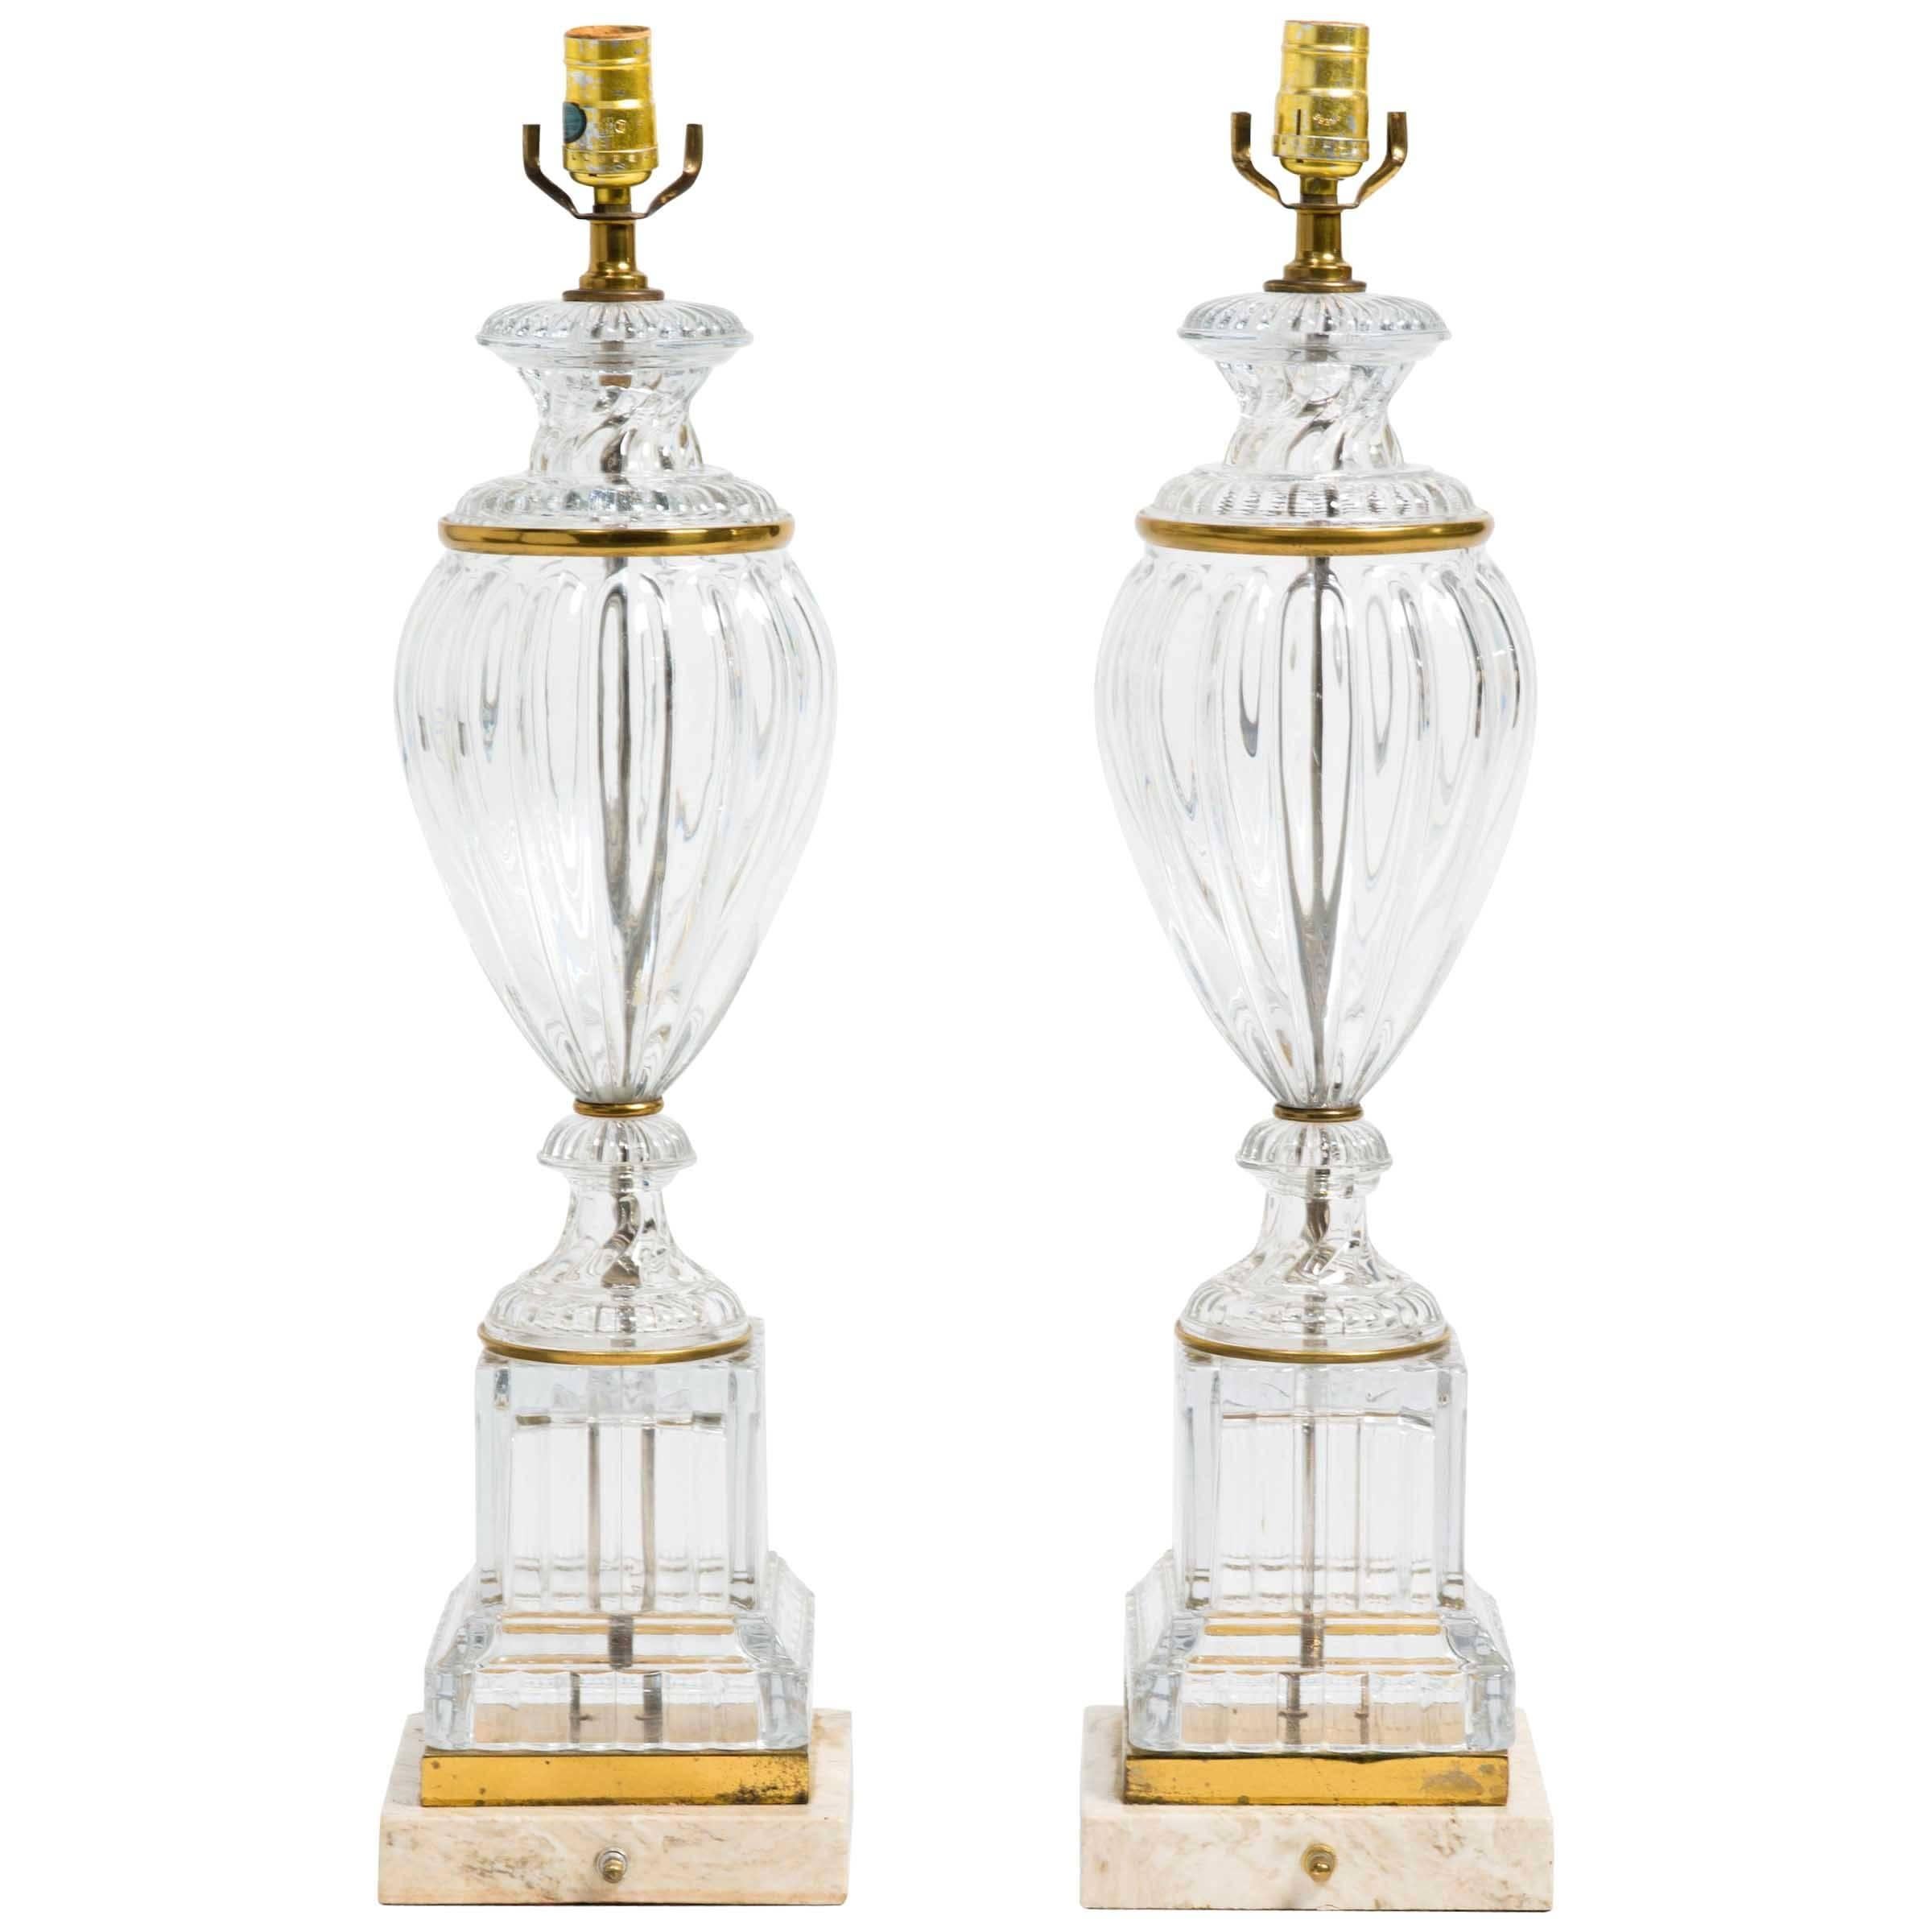 Pair of Large Classical Glass Table Lamps with Brass Accents